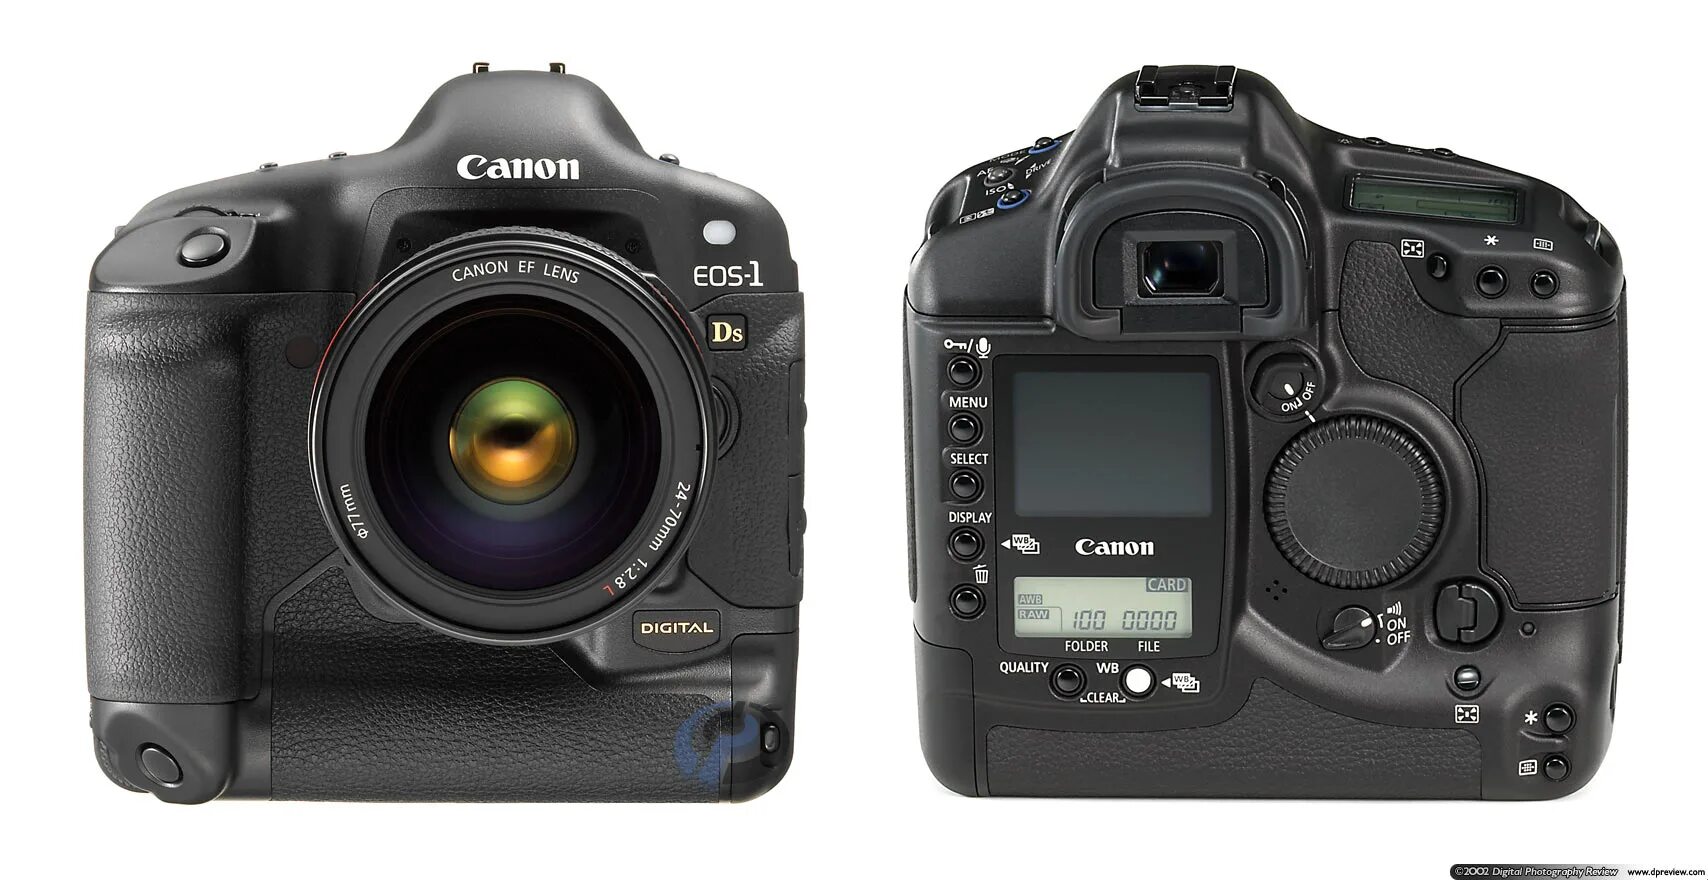 Canon EOS 1ds 2002. Canon EOS-1ds. Canon EOS-1 DS Digital. Canon EOS-1ds dpreview.